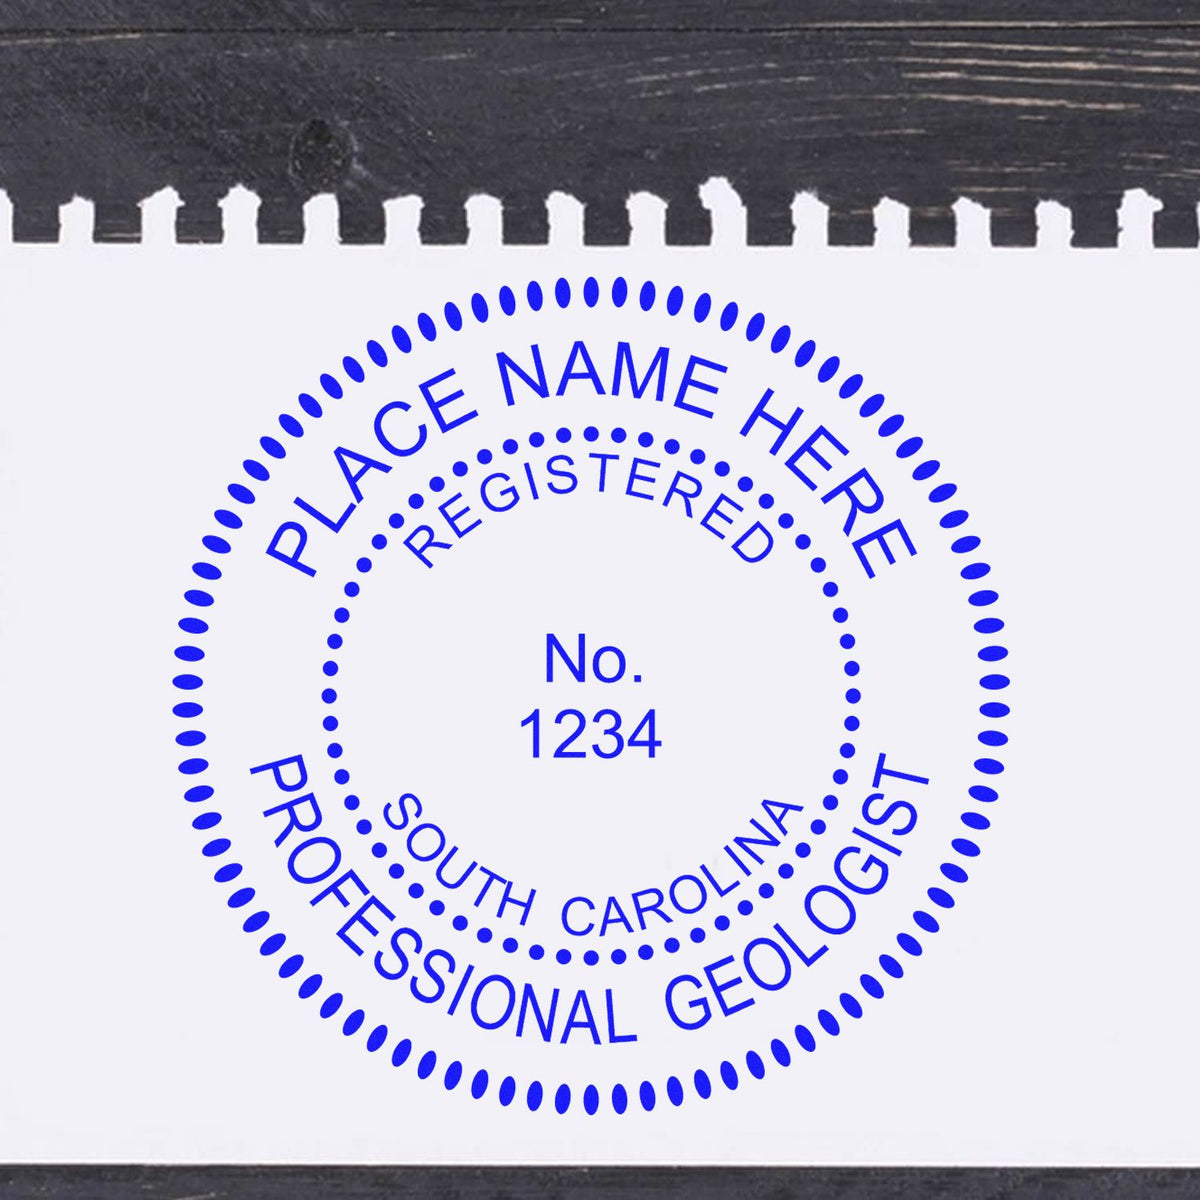 An alternative view of the Self-Inking South Carolina Geologist Stamp stamped on a sheet of paper showing the image in use